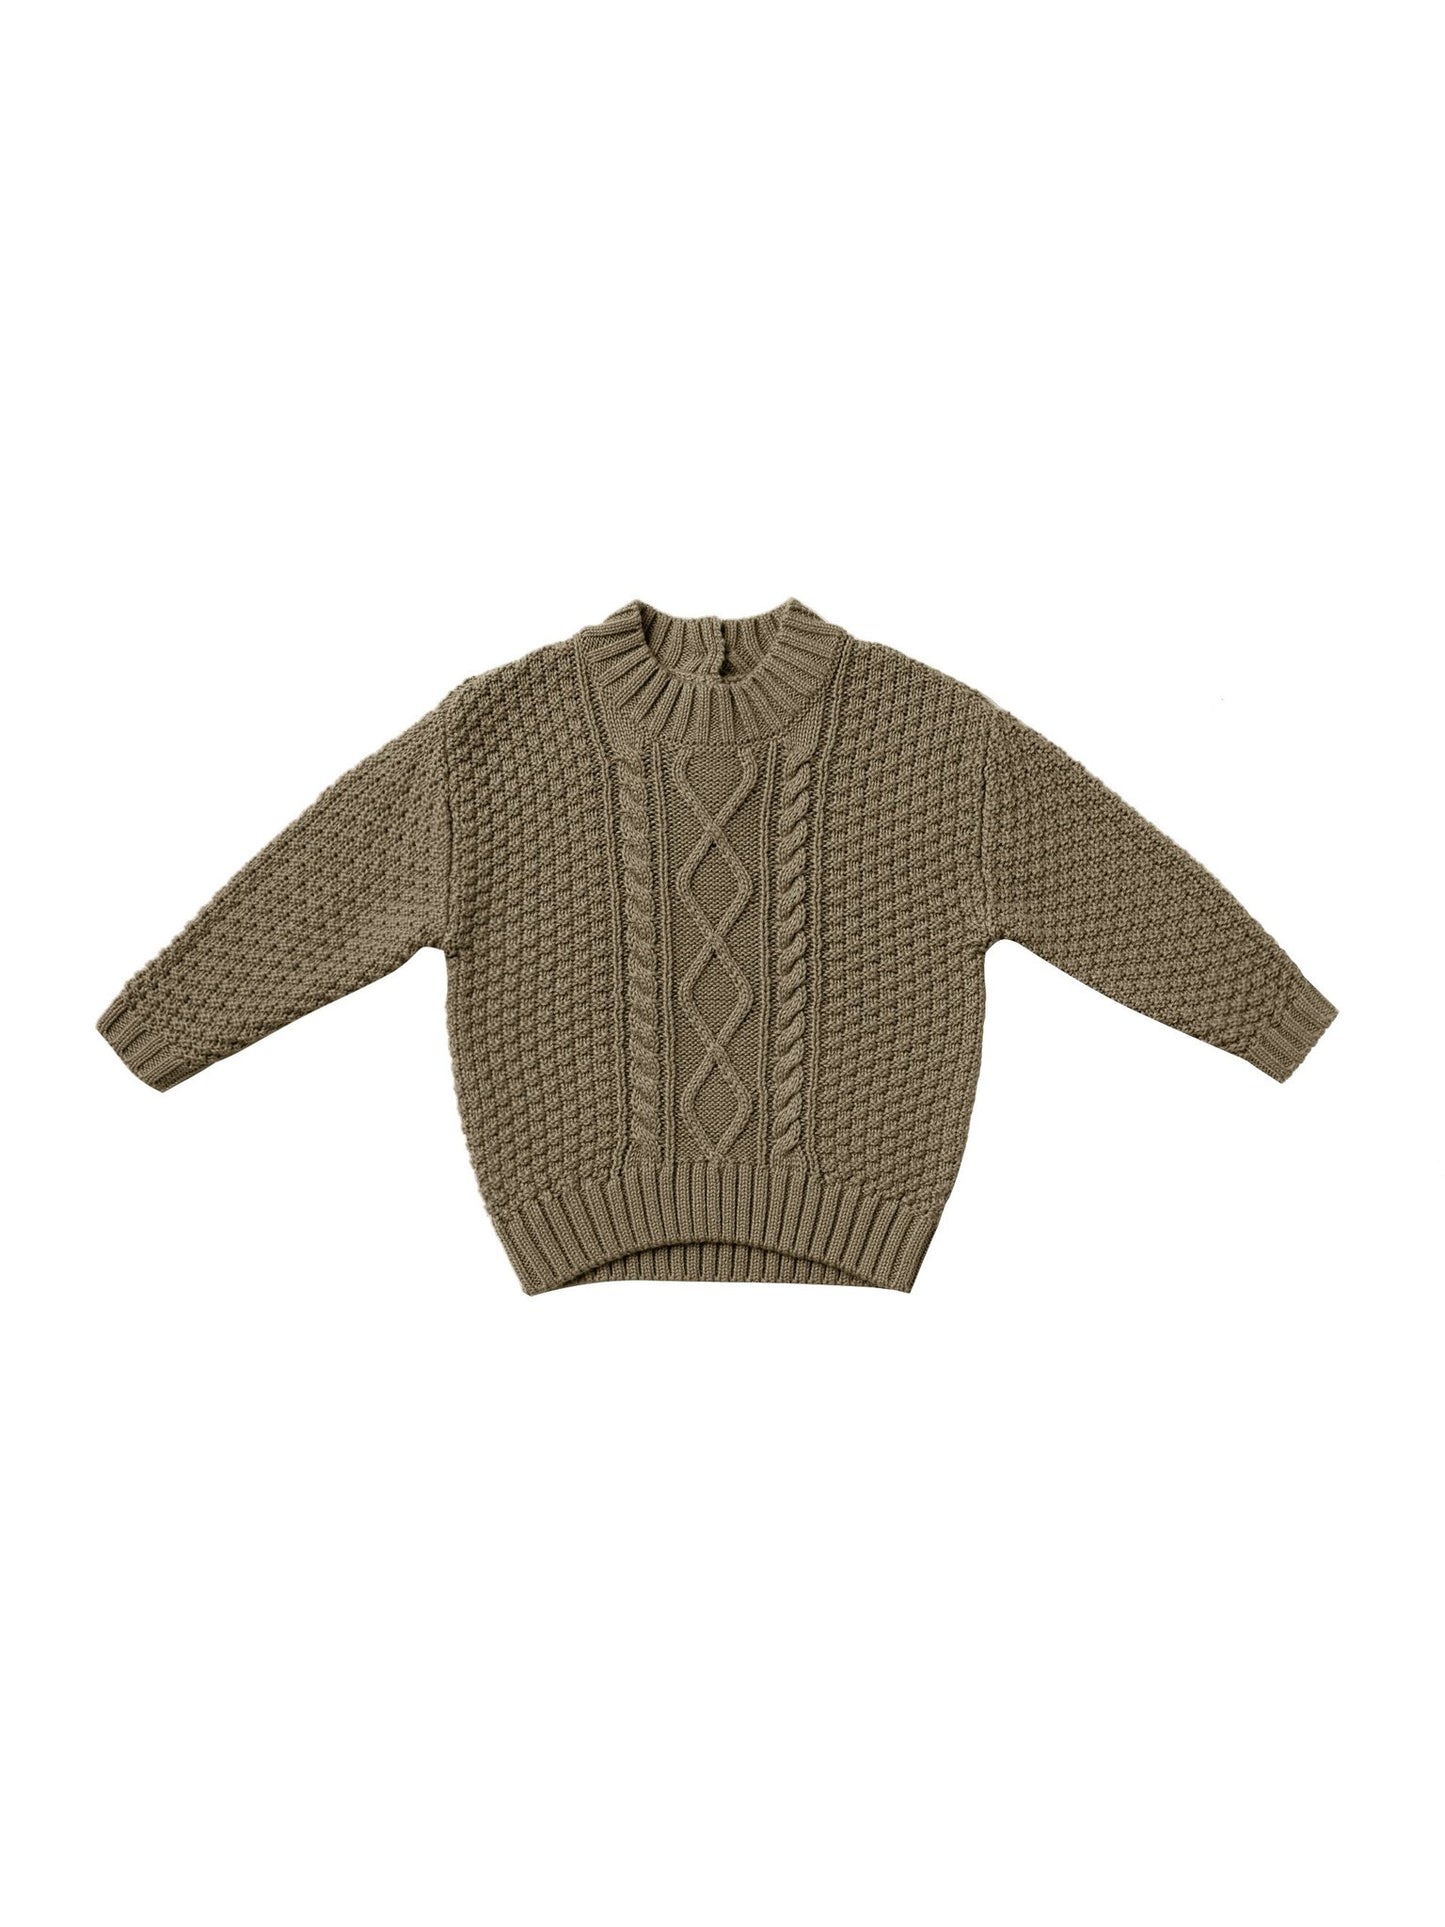 Sweater Cable Knit - Olive